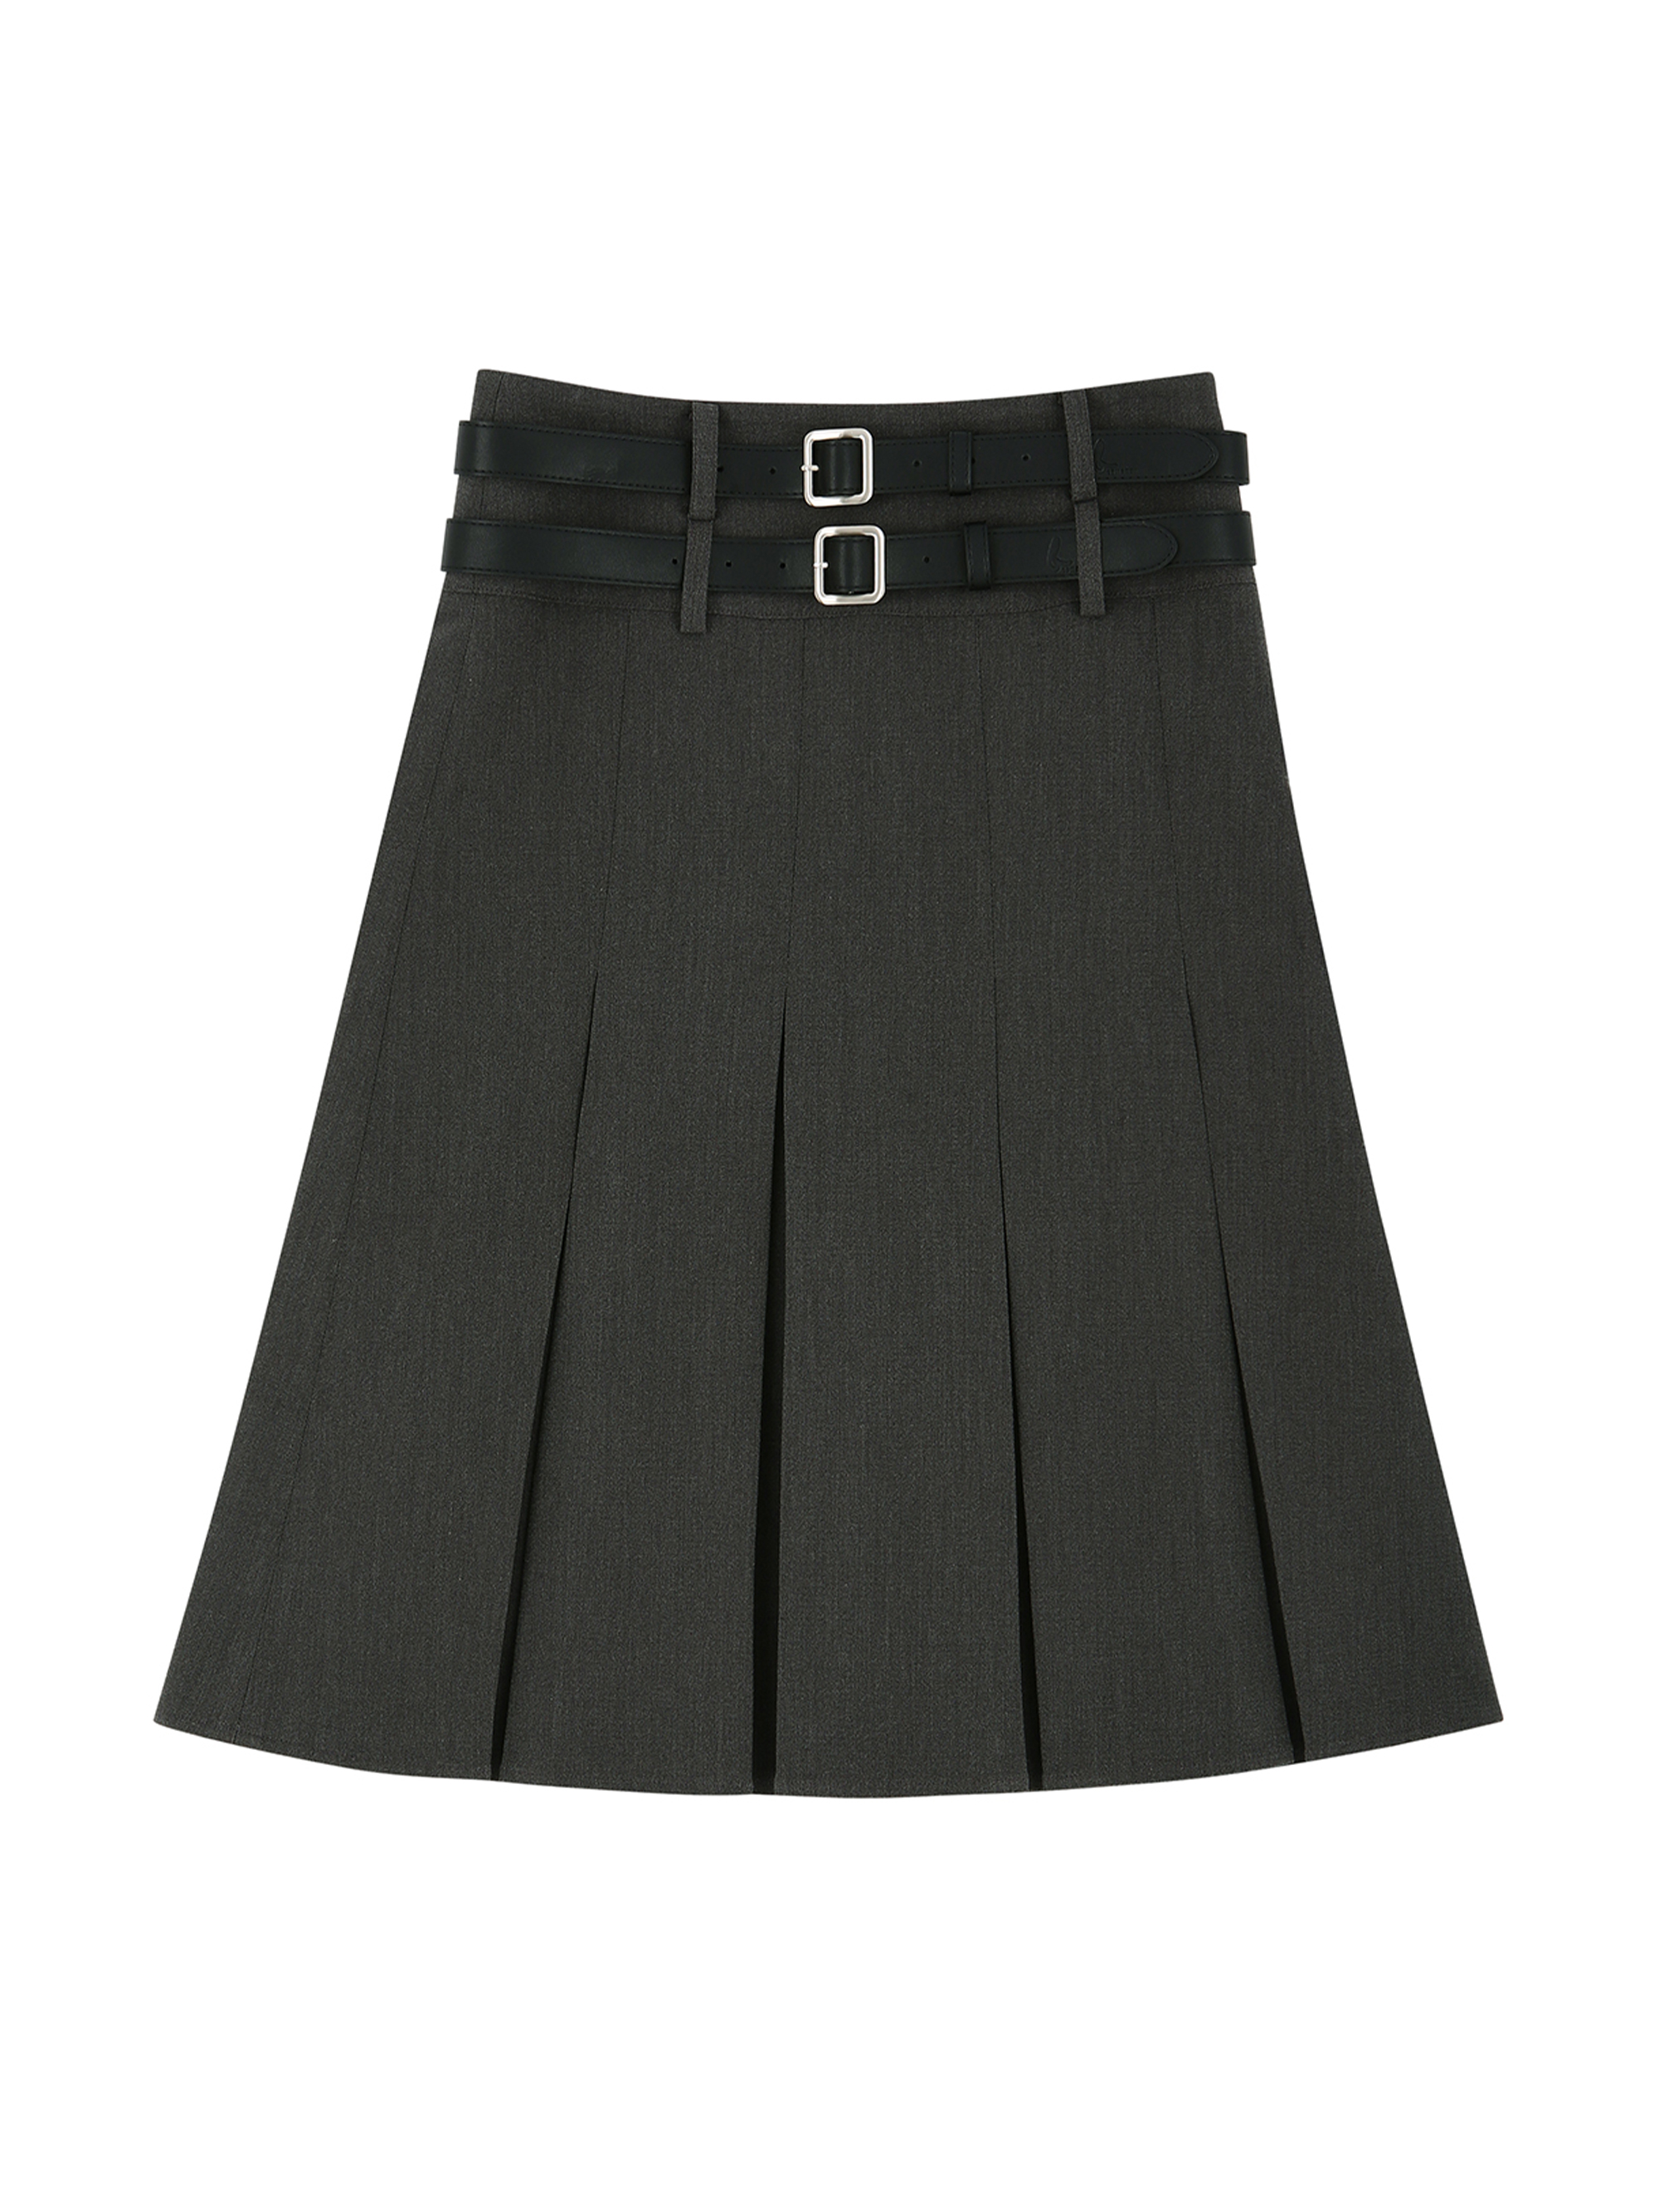 DOUBLE BELTED MIDI SKIRT (CHARCOAL)